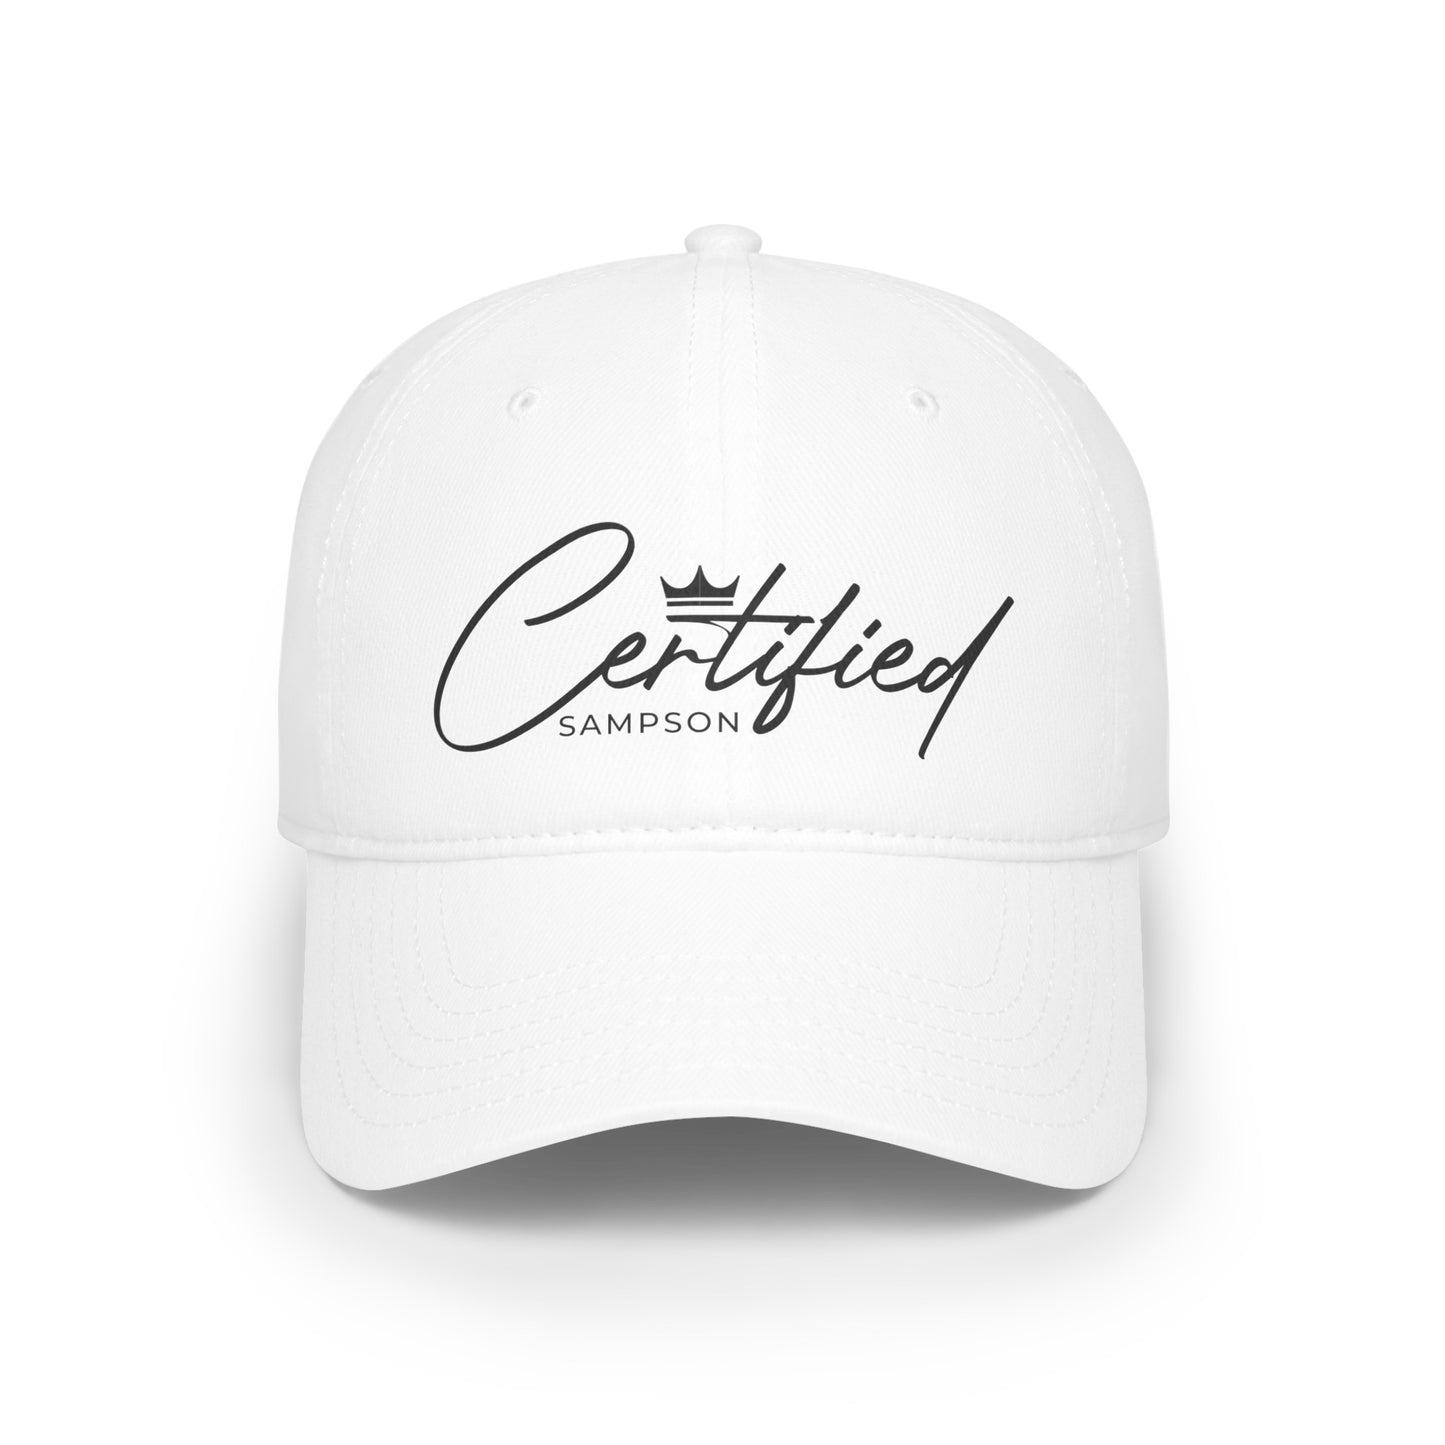 Certified Sampson - Dad Hat